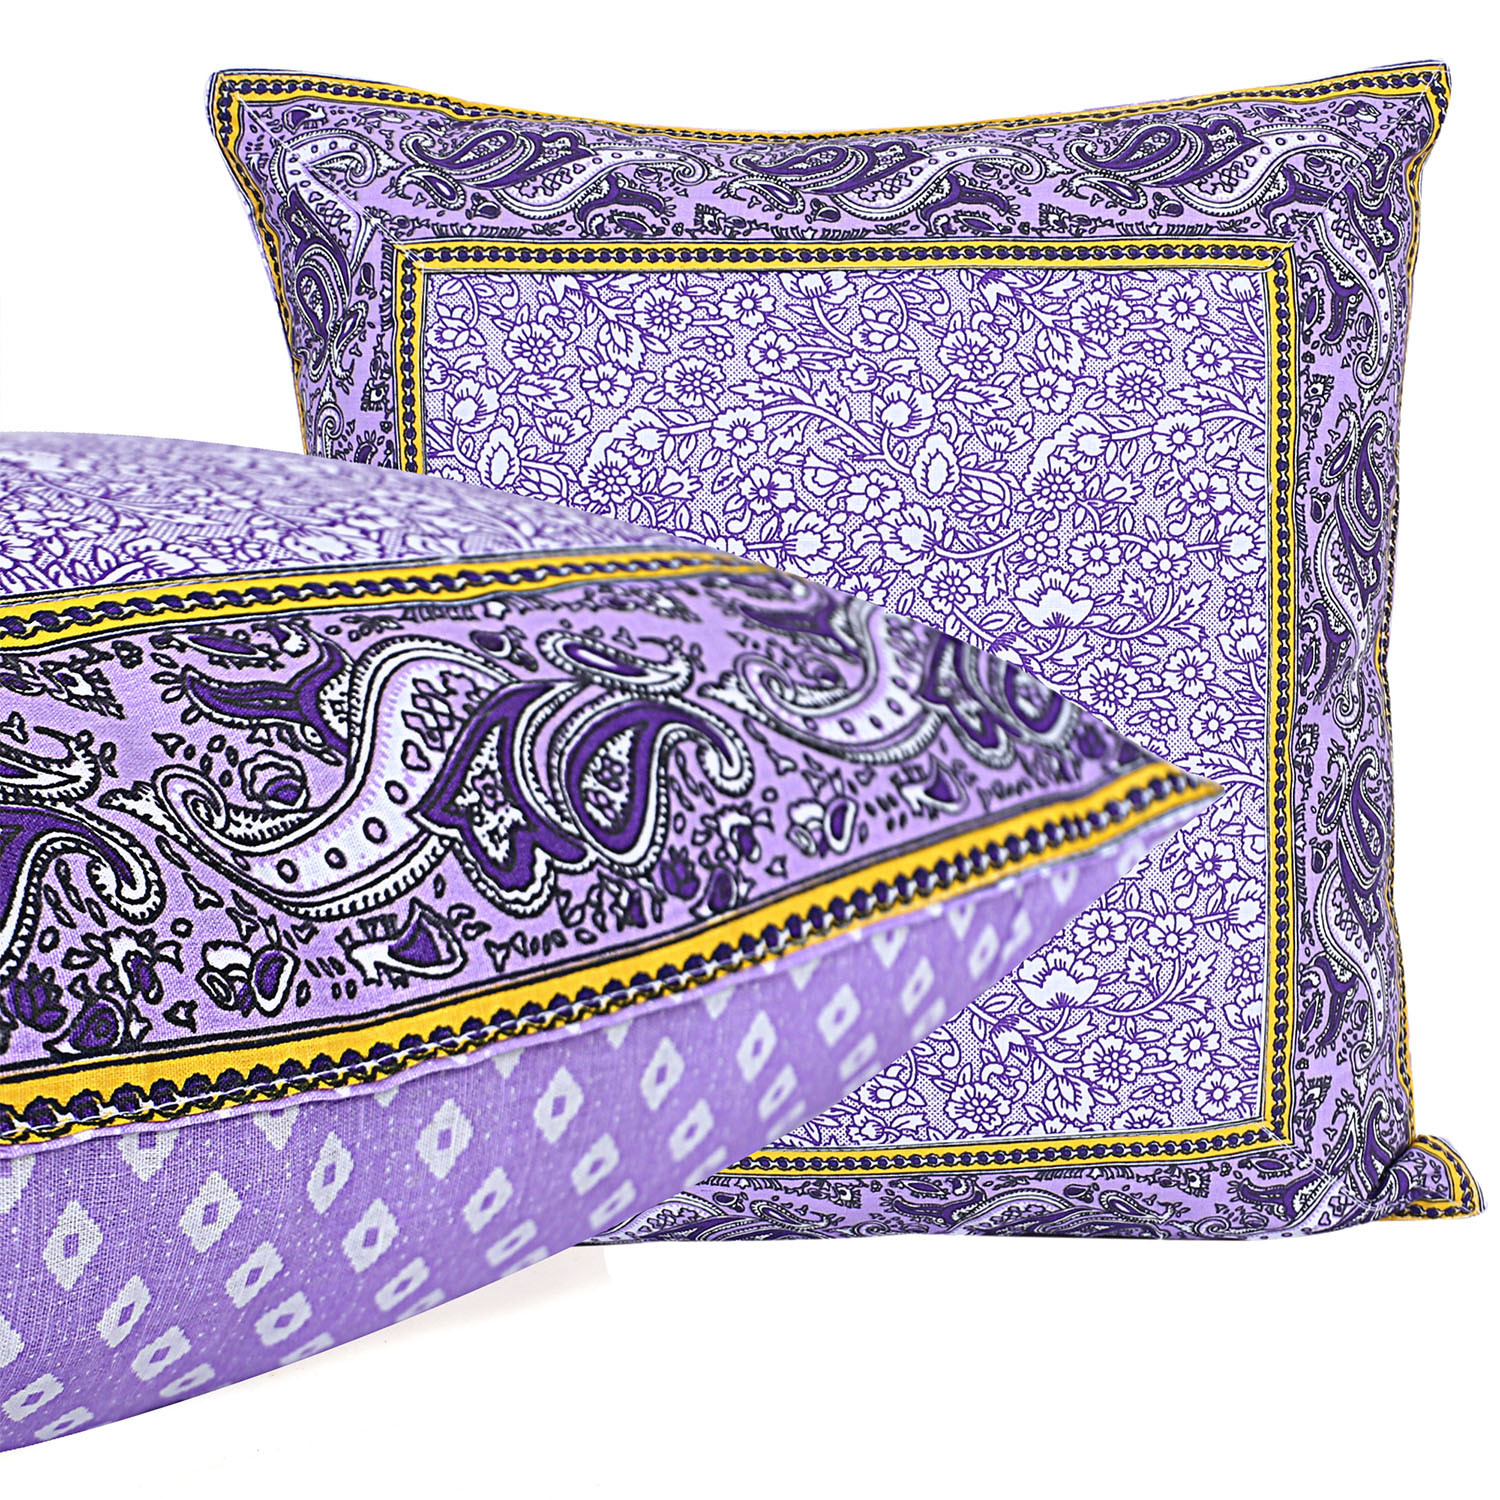 Kuber Industries Cushion Cover|Ractangle Cushion Covers|Sofa Cushion Covers|Cushion Covers 16 inch x 16 inch|Cushion Cover Set of 5 (Purple)